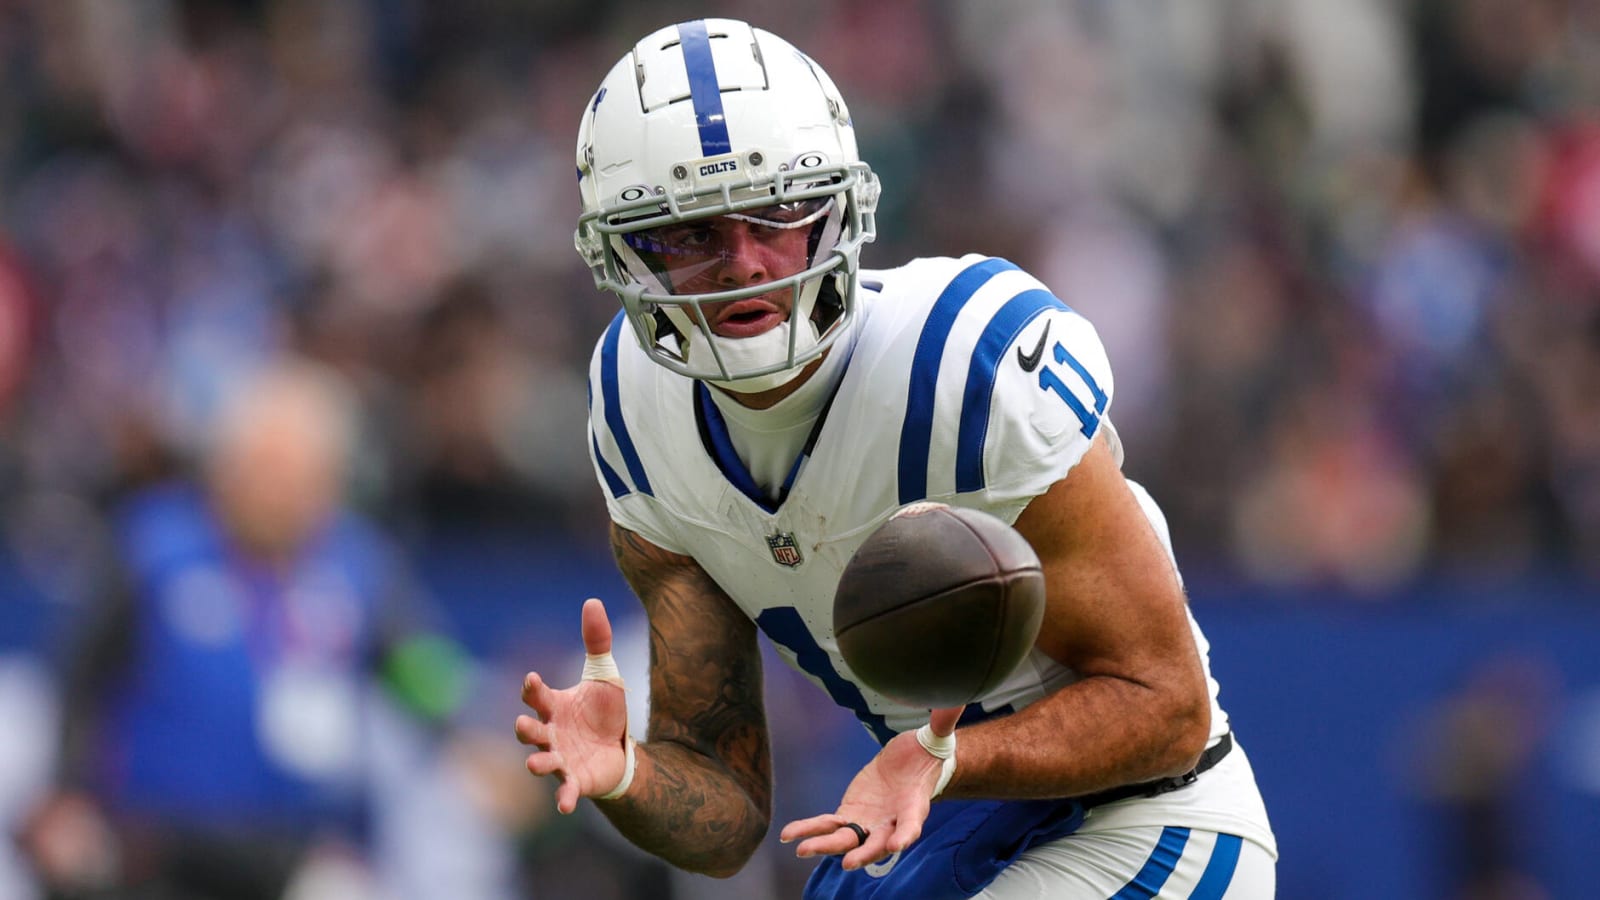 Colts WR shares concerning recollection of brutal hit